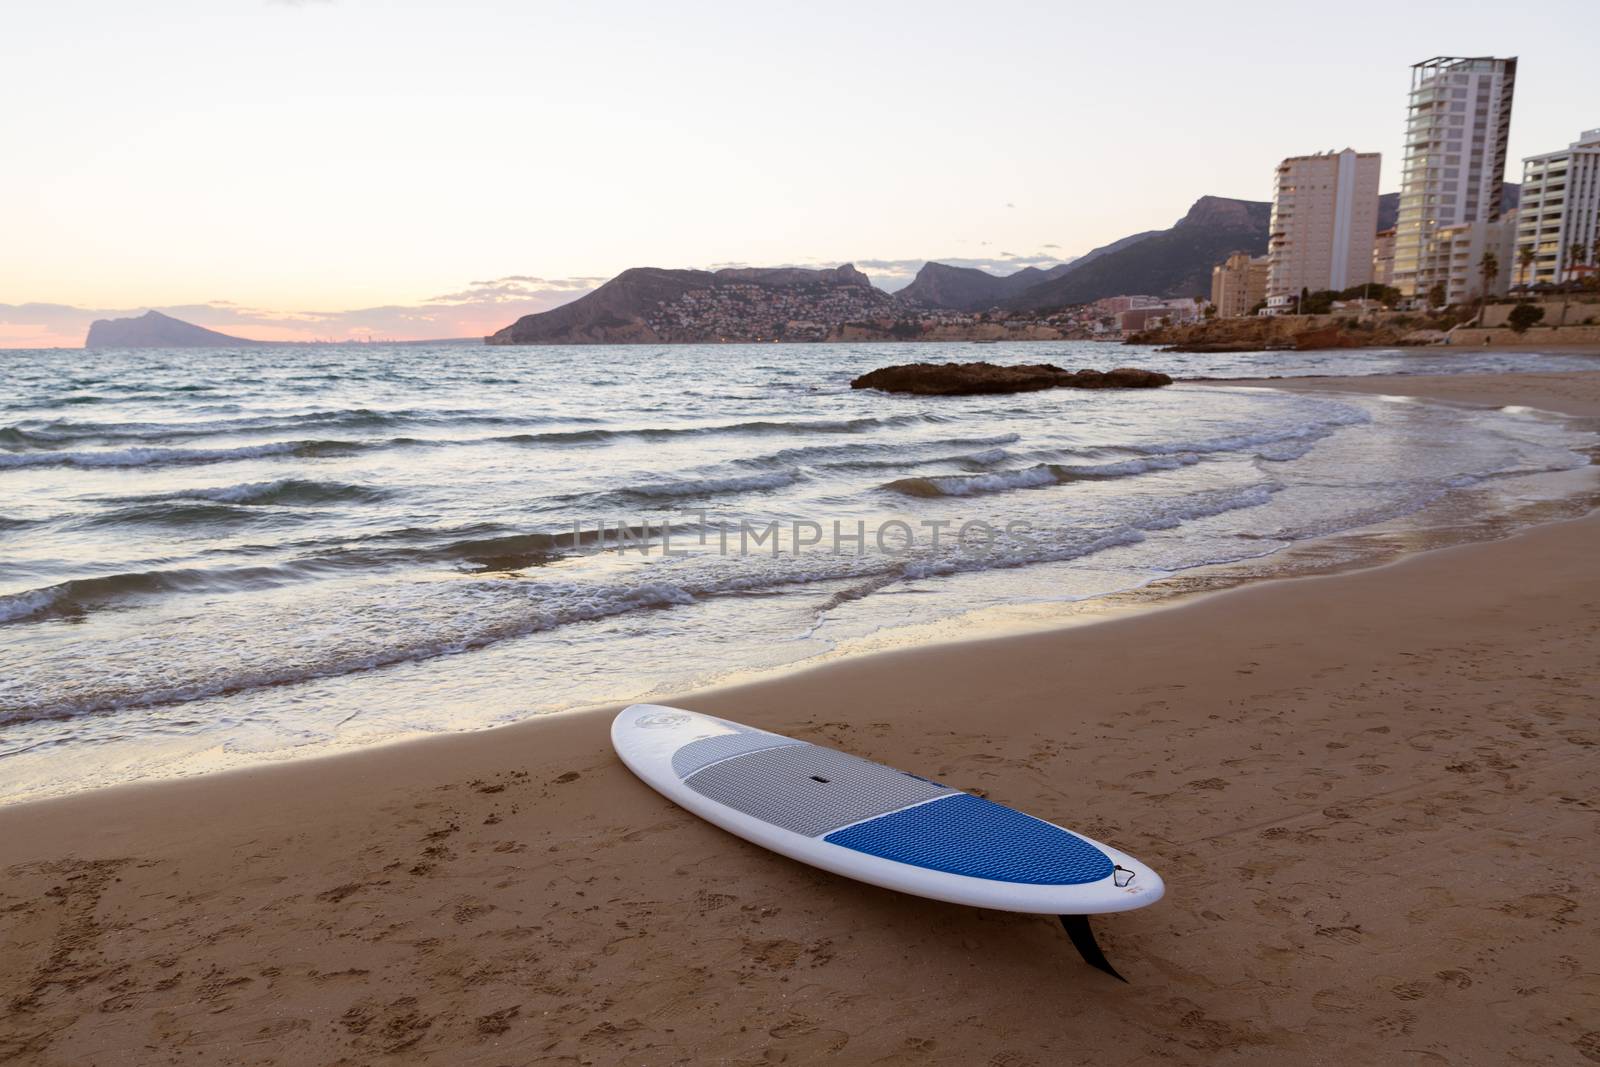 Calpe Alicante sunset at beach Cantal Roig in Mediterranean Spain with paddle sufboard